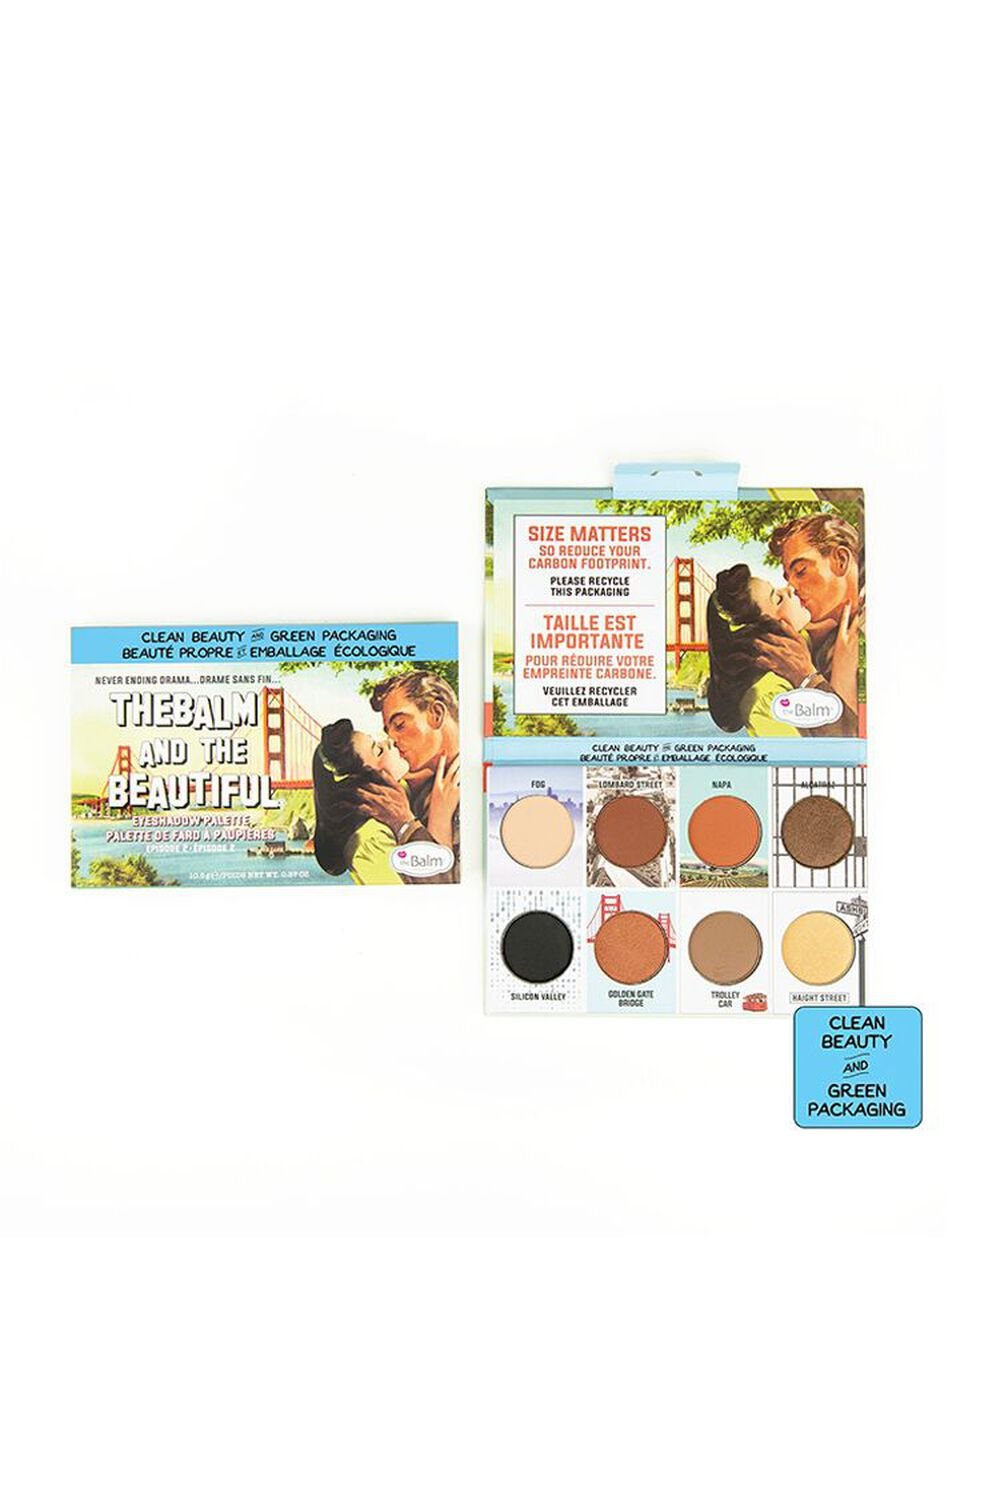 MULTI theBalm and the Beautiful Episode 2, image 1